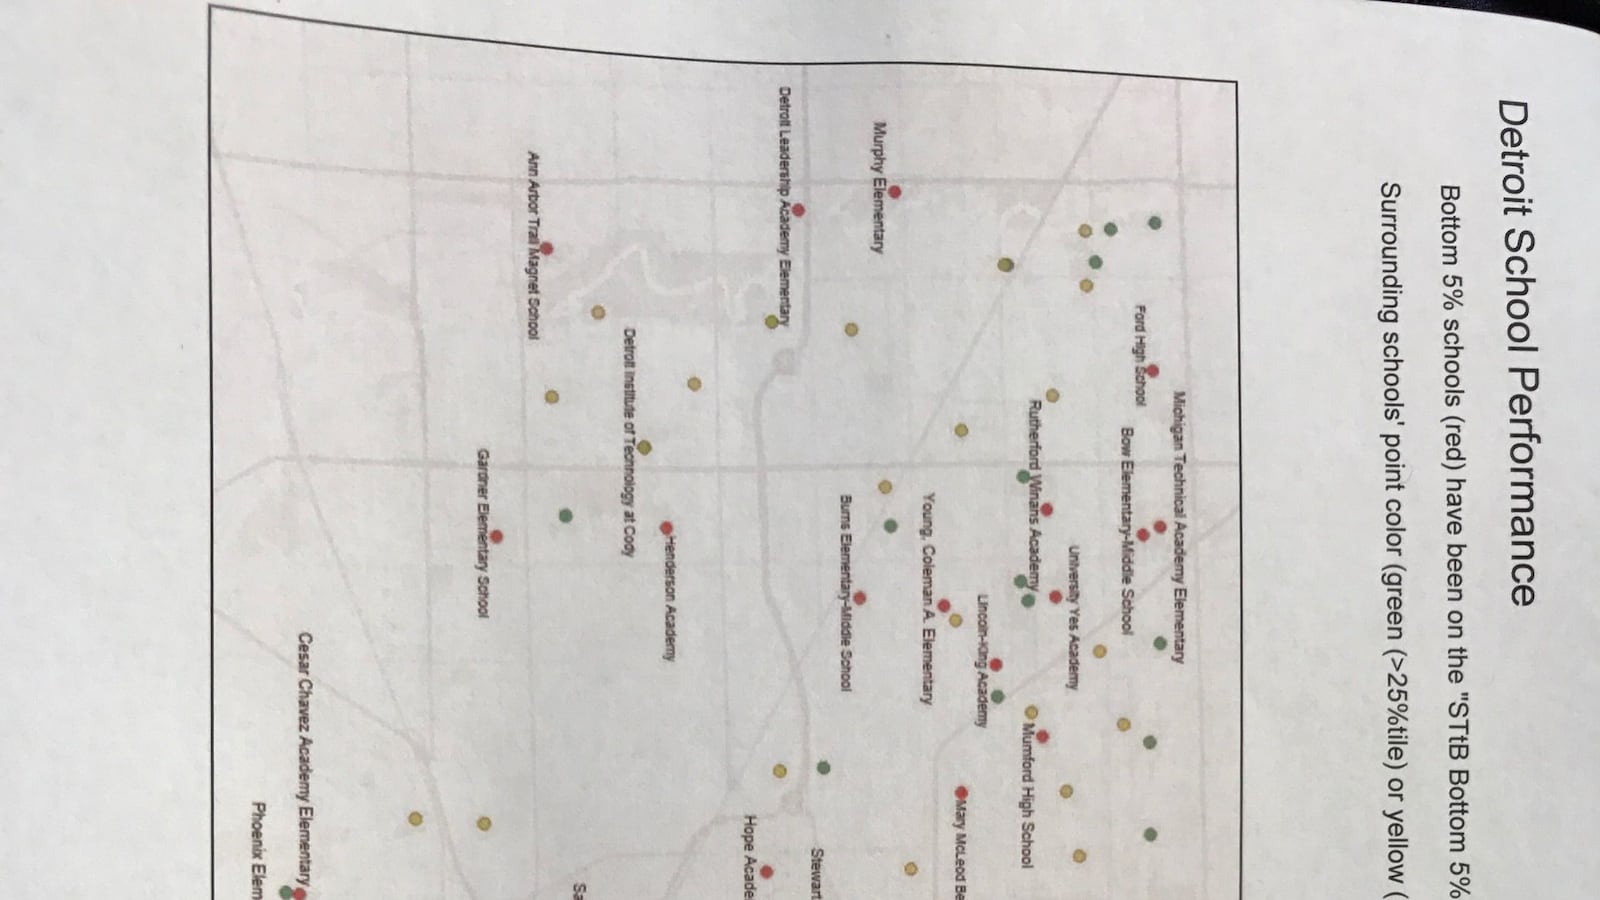 This map of Detroit schools and their rankings was shared at a meeting of community and education leaders.